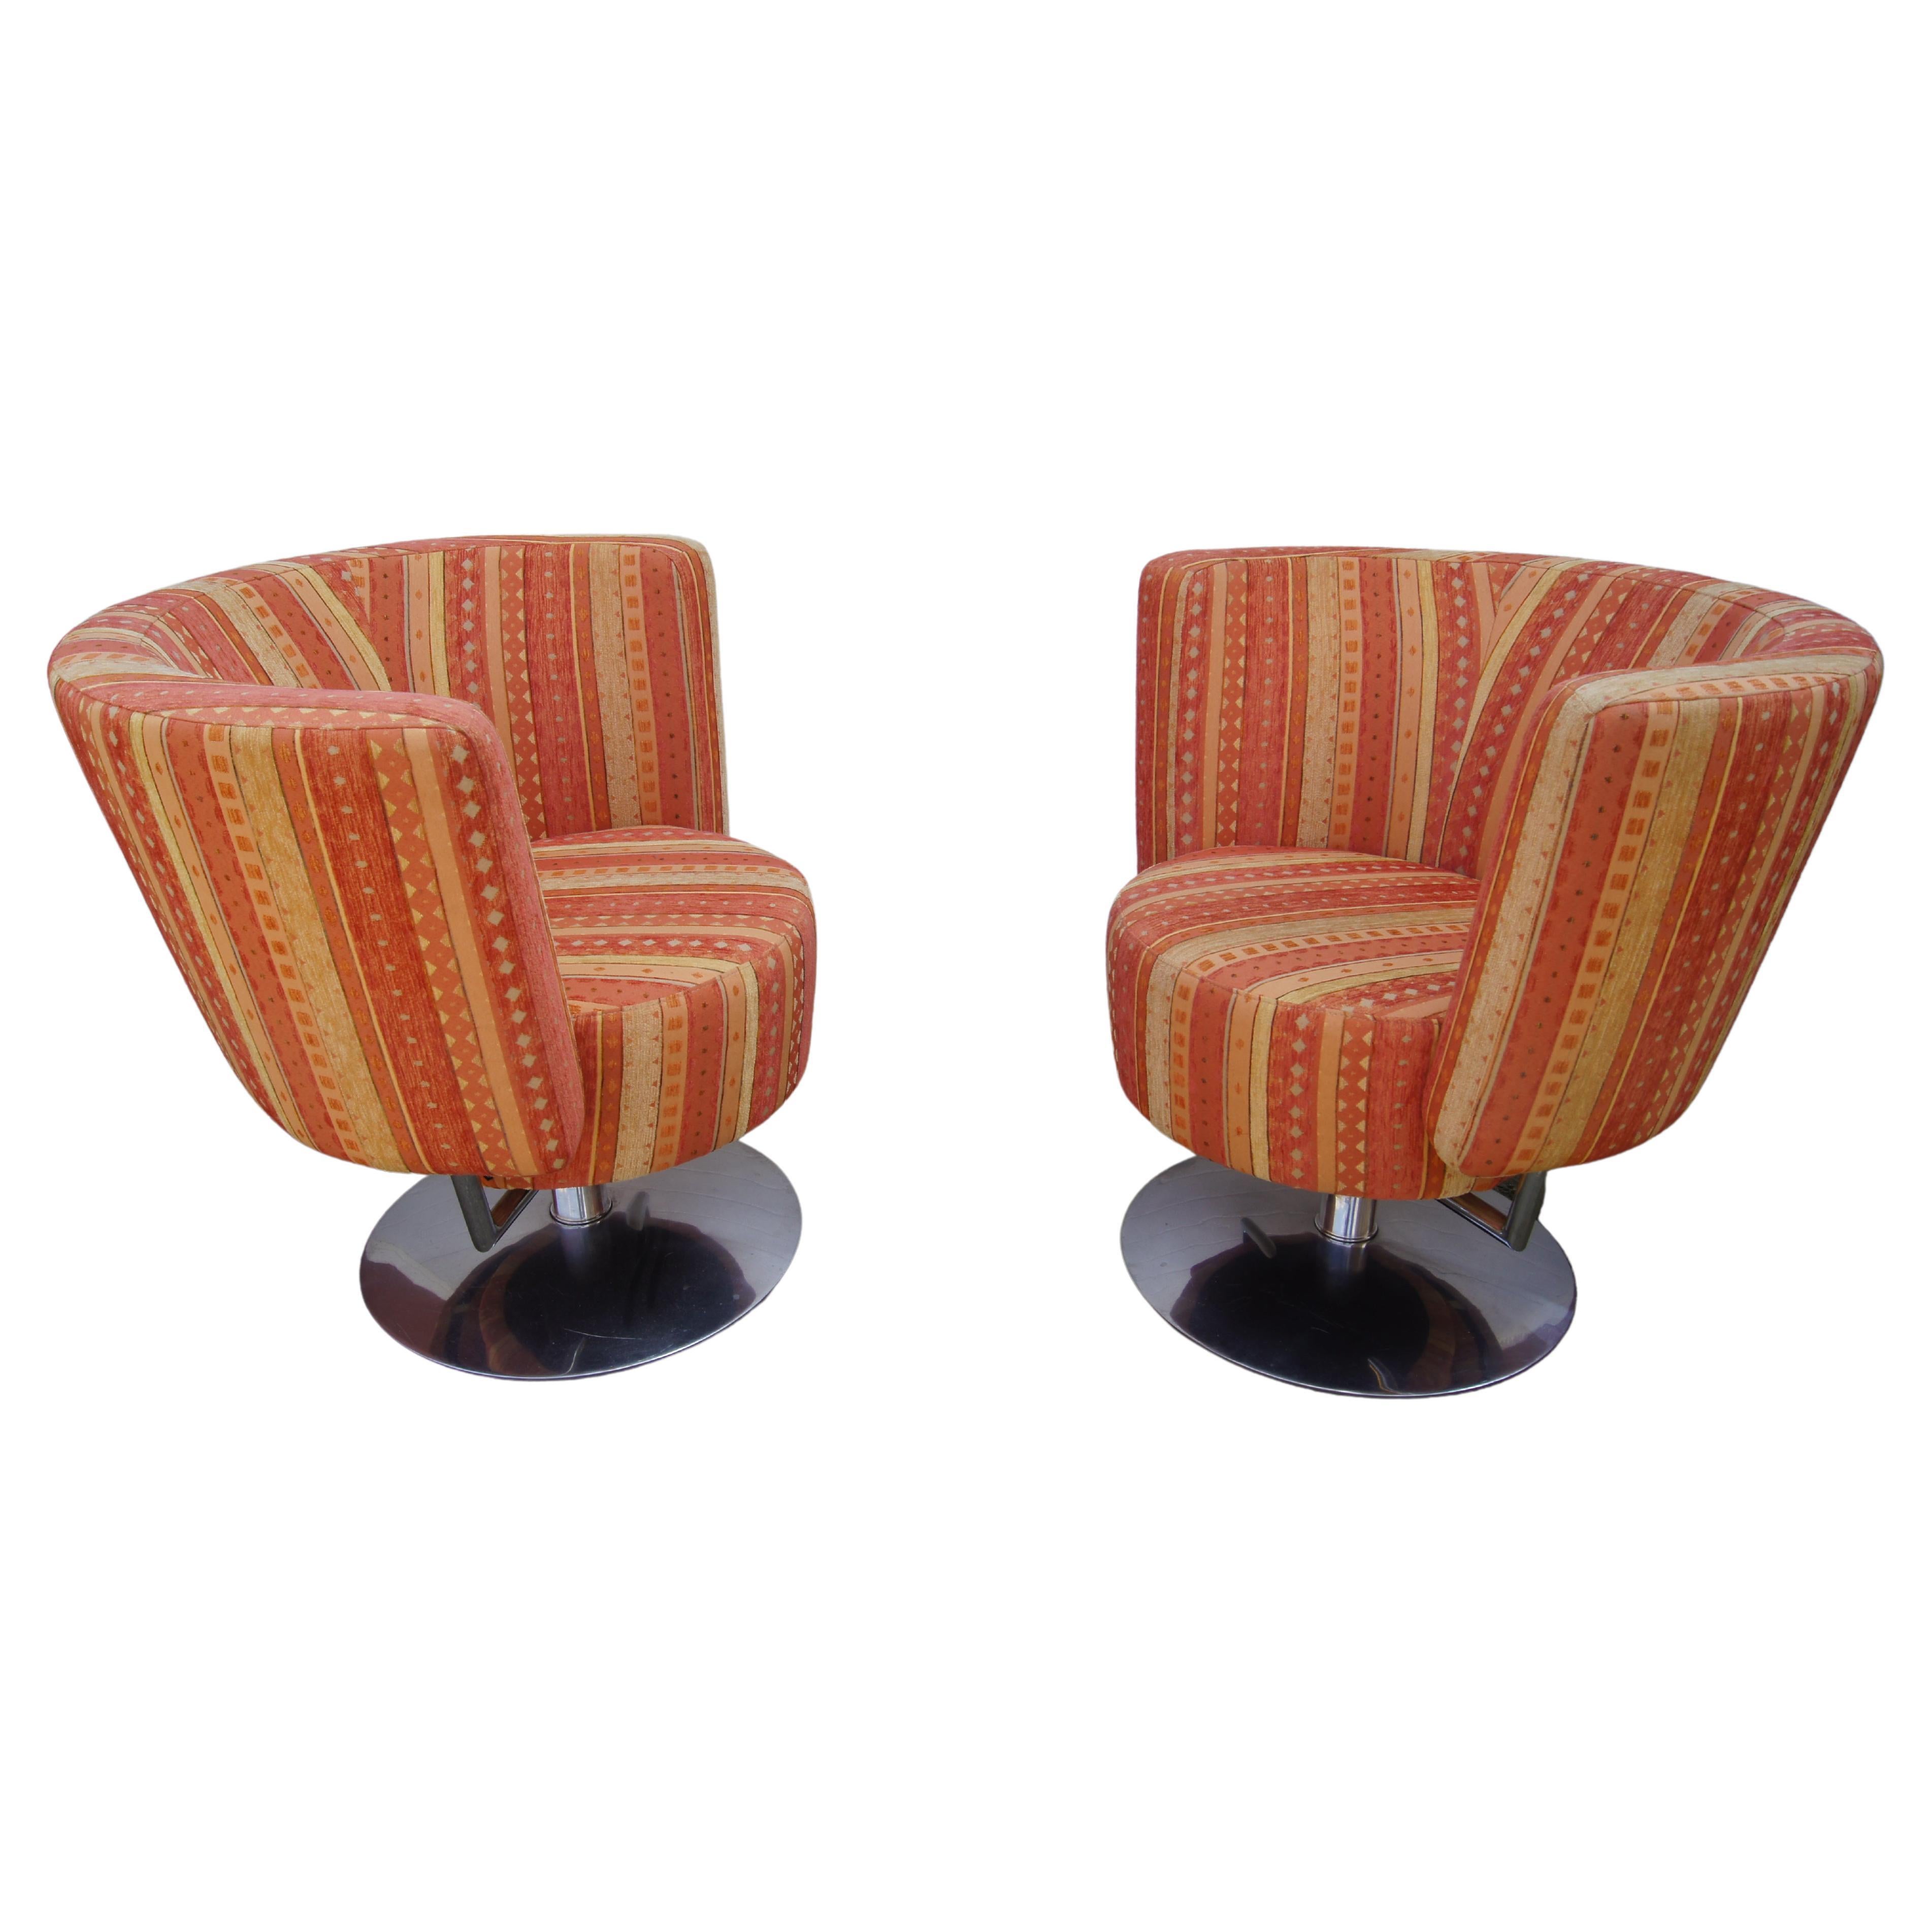 Pair of Circo Swivel Chairs by Peter Maly for COR For Sale